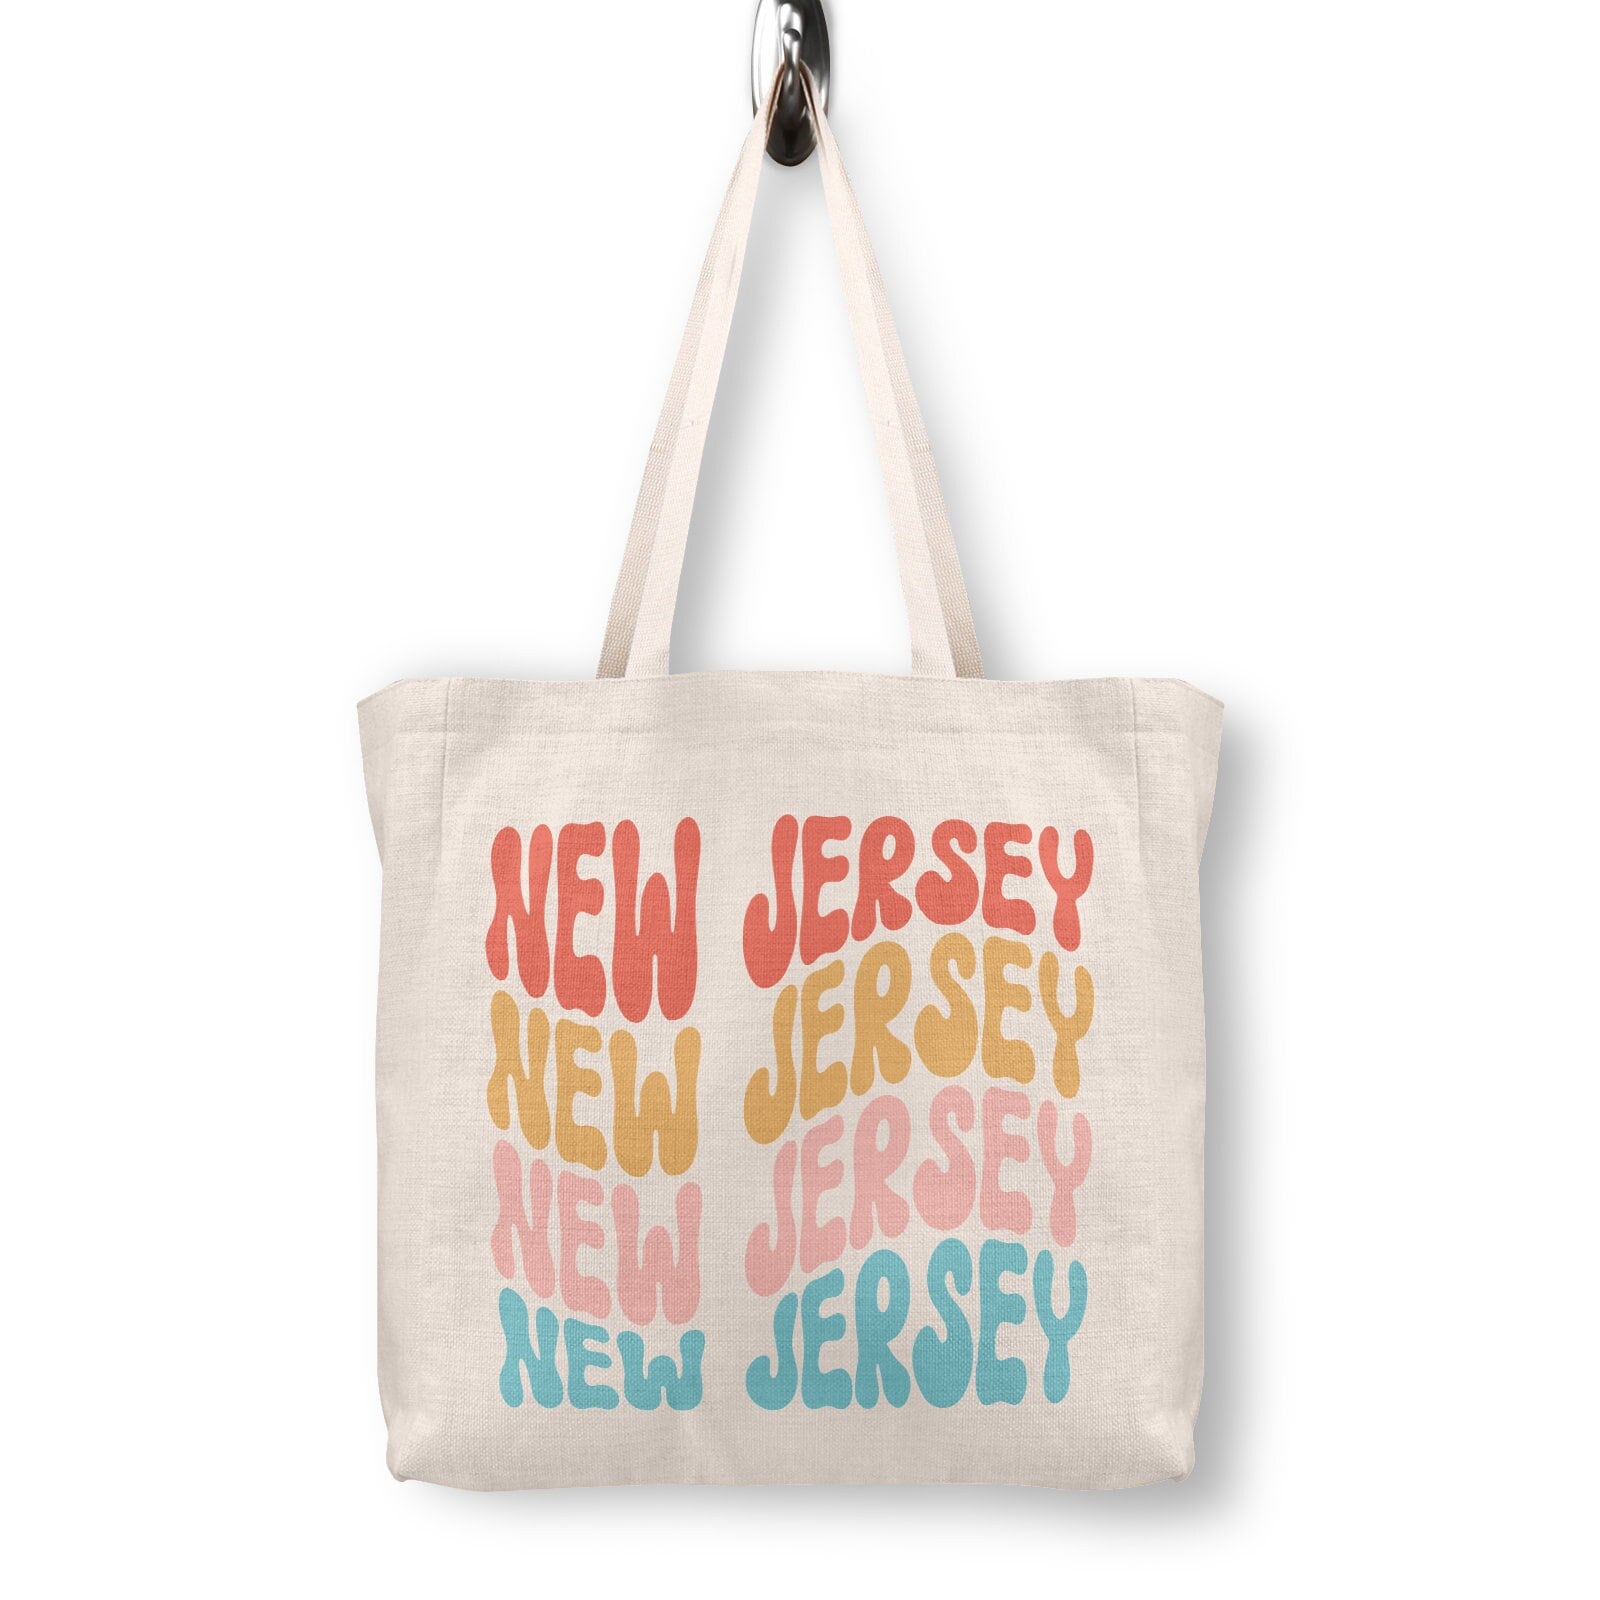 New Jersey Tote Bag - New Jersey Beach Bag - New Jersey Girls Trip - New  Jersey Book Bag - New Jersey Teacher Tote - New Jersey Market Tote